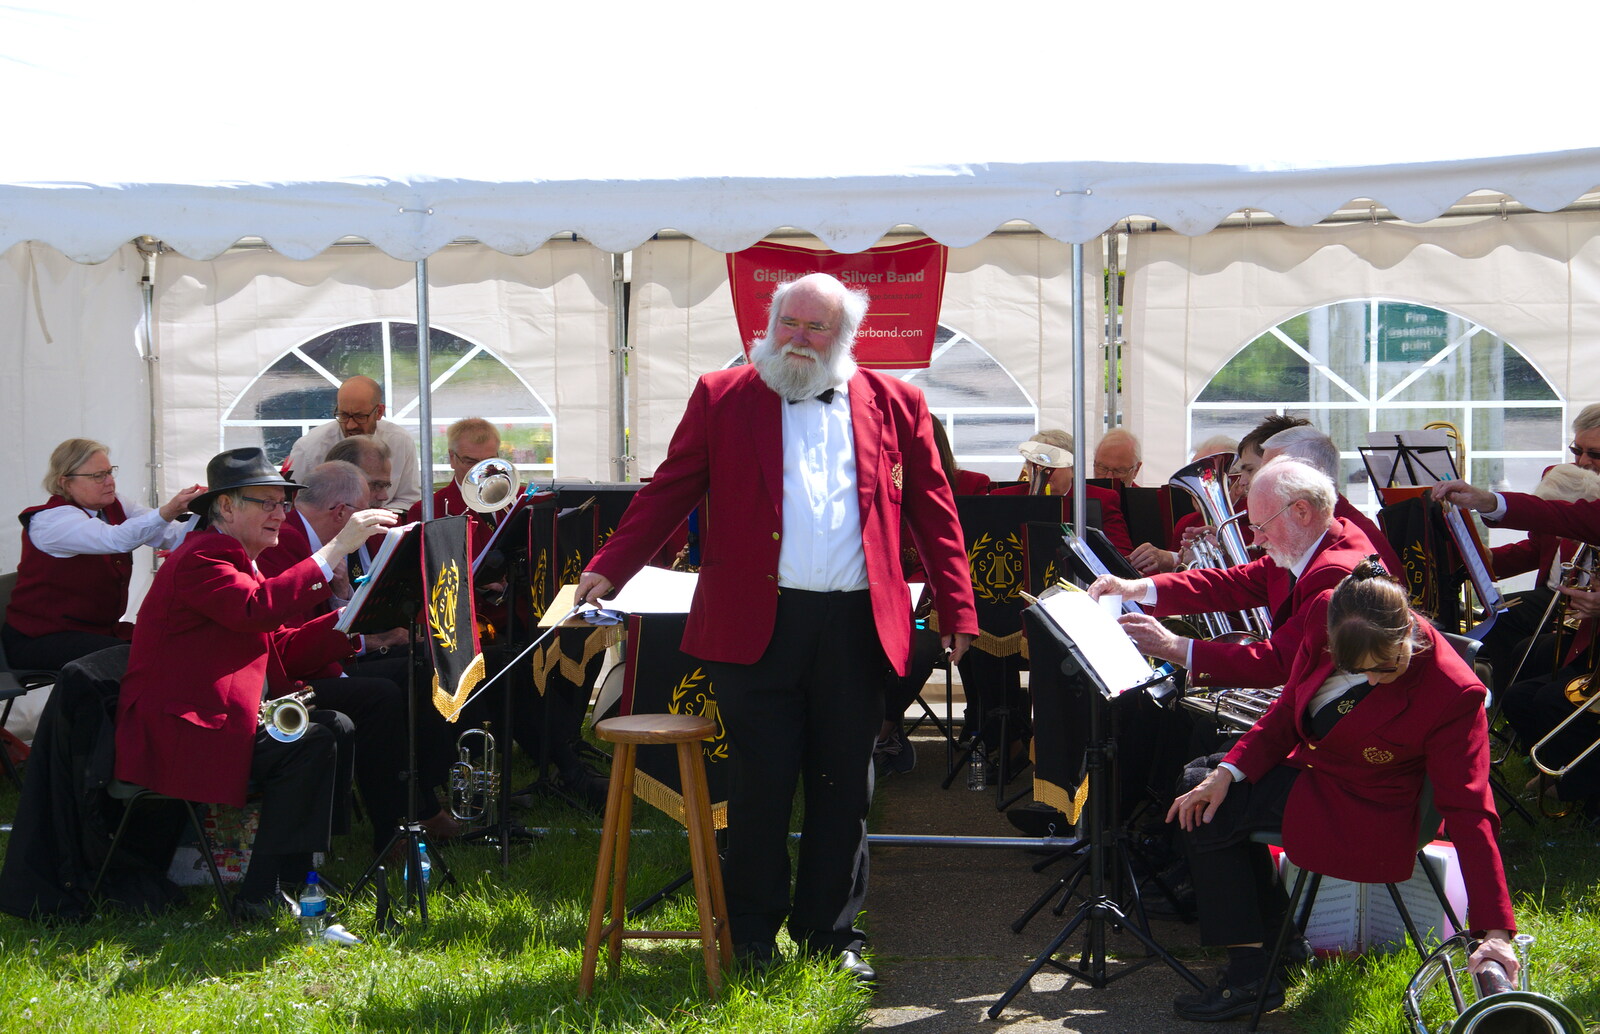 Adrian takes a bit of applause from The Gislingham Silver Band at the Village Hall, Gislingham, Suffolk - 12th May 2019